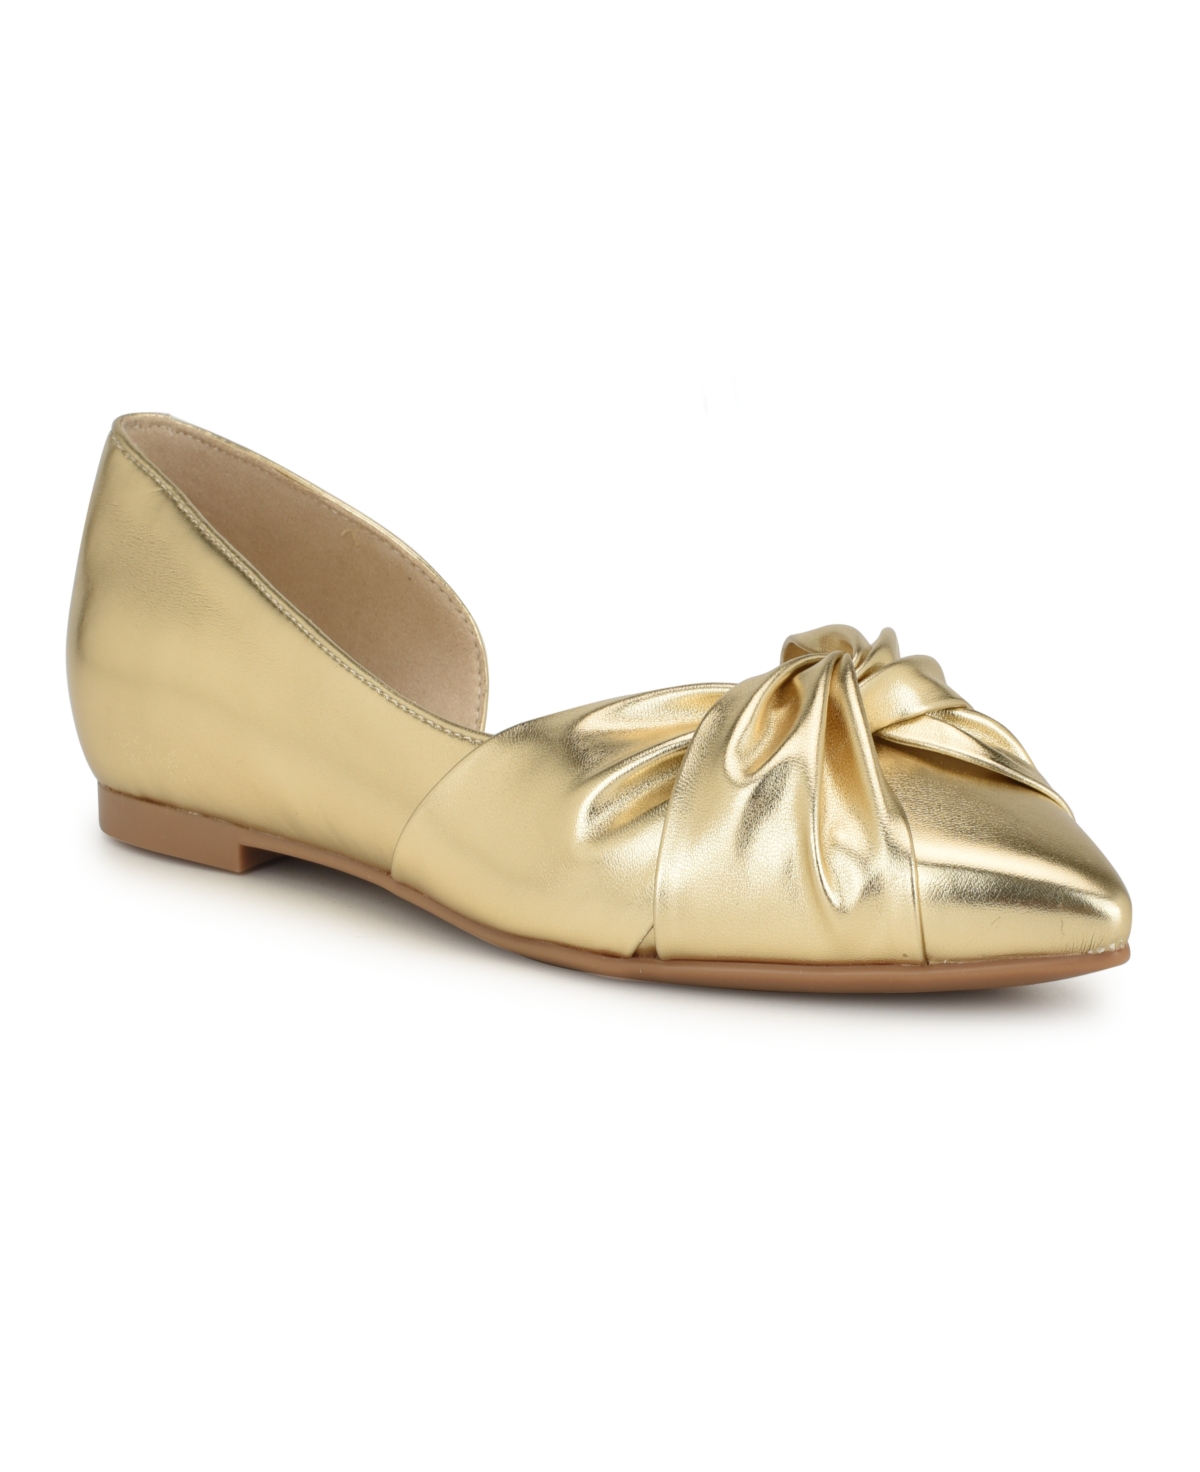 Nine West Women's Briane Slip-on Pointy Toe Dress Flats In Gold - Faux Leather